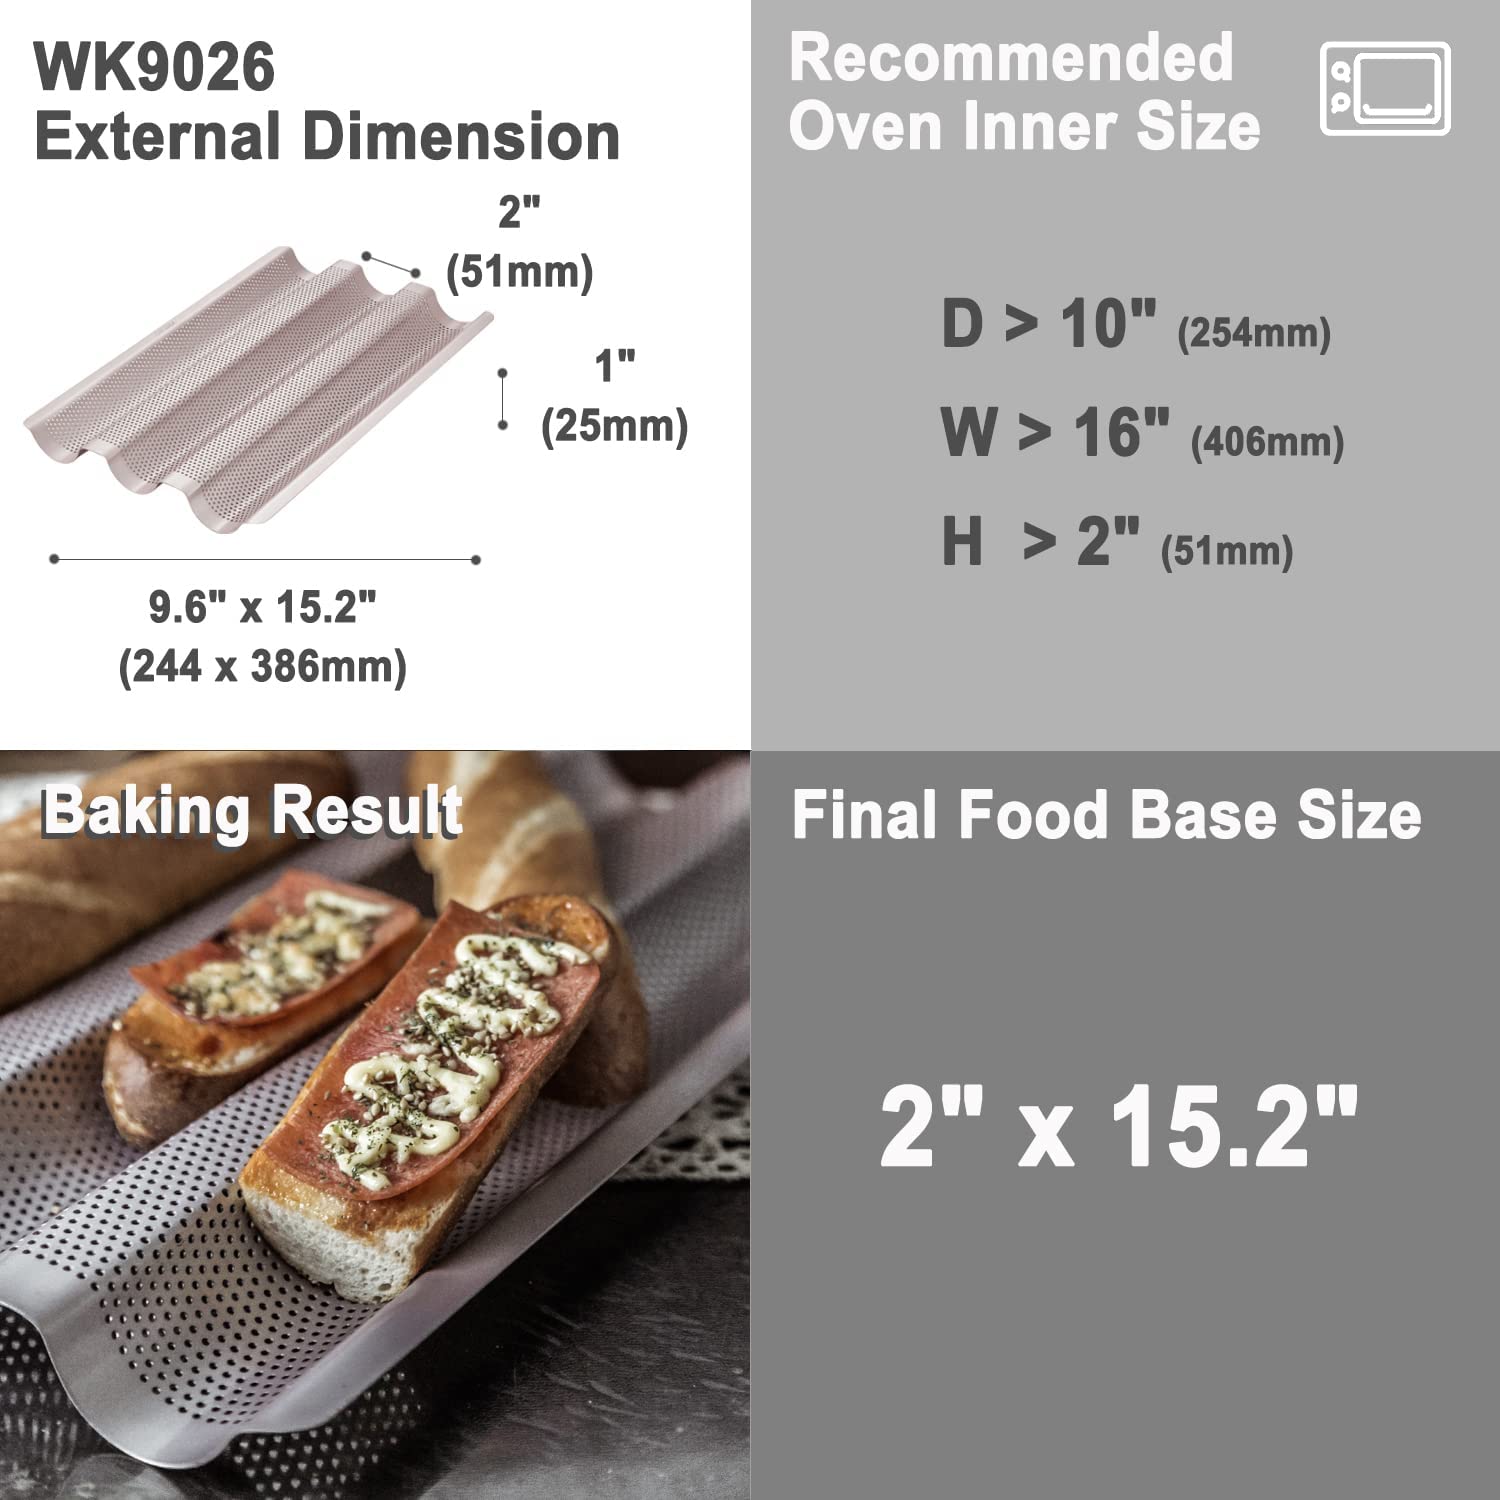 CHEFMADE 15-inch Rimmed Baking Pan, Non-Stick Carbon Steel Cookie Sheet Pan, FDA Approved for Oven Roasting Meat Bread Jelly Roll Battenberg Pizzas